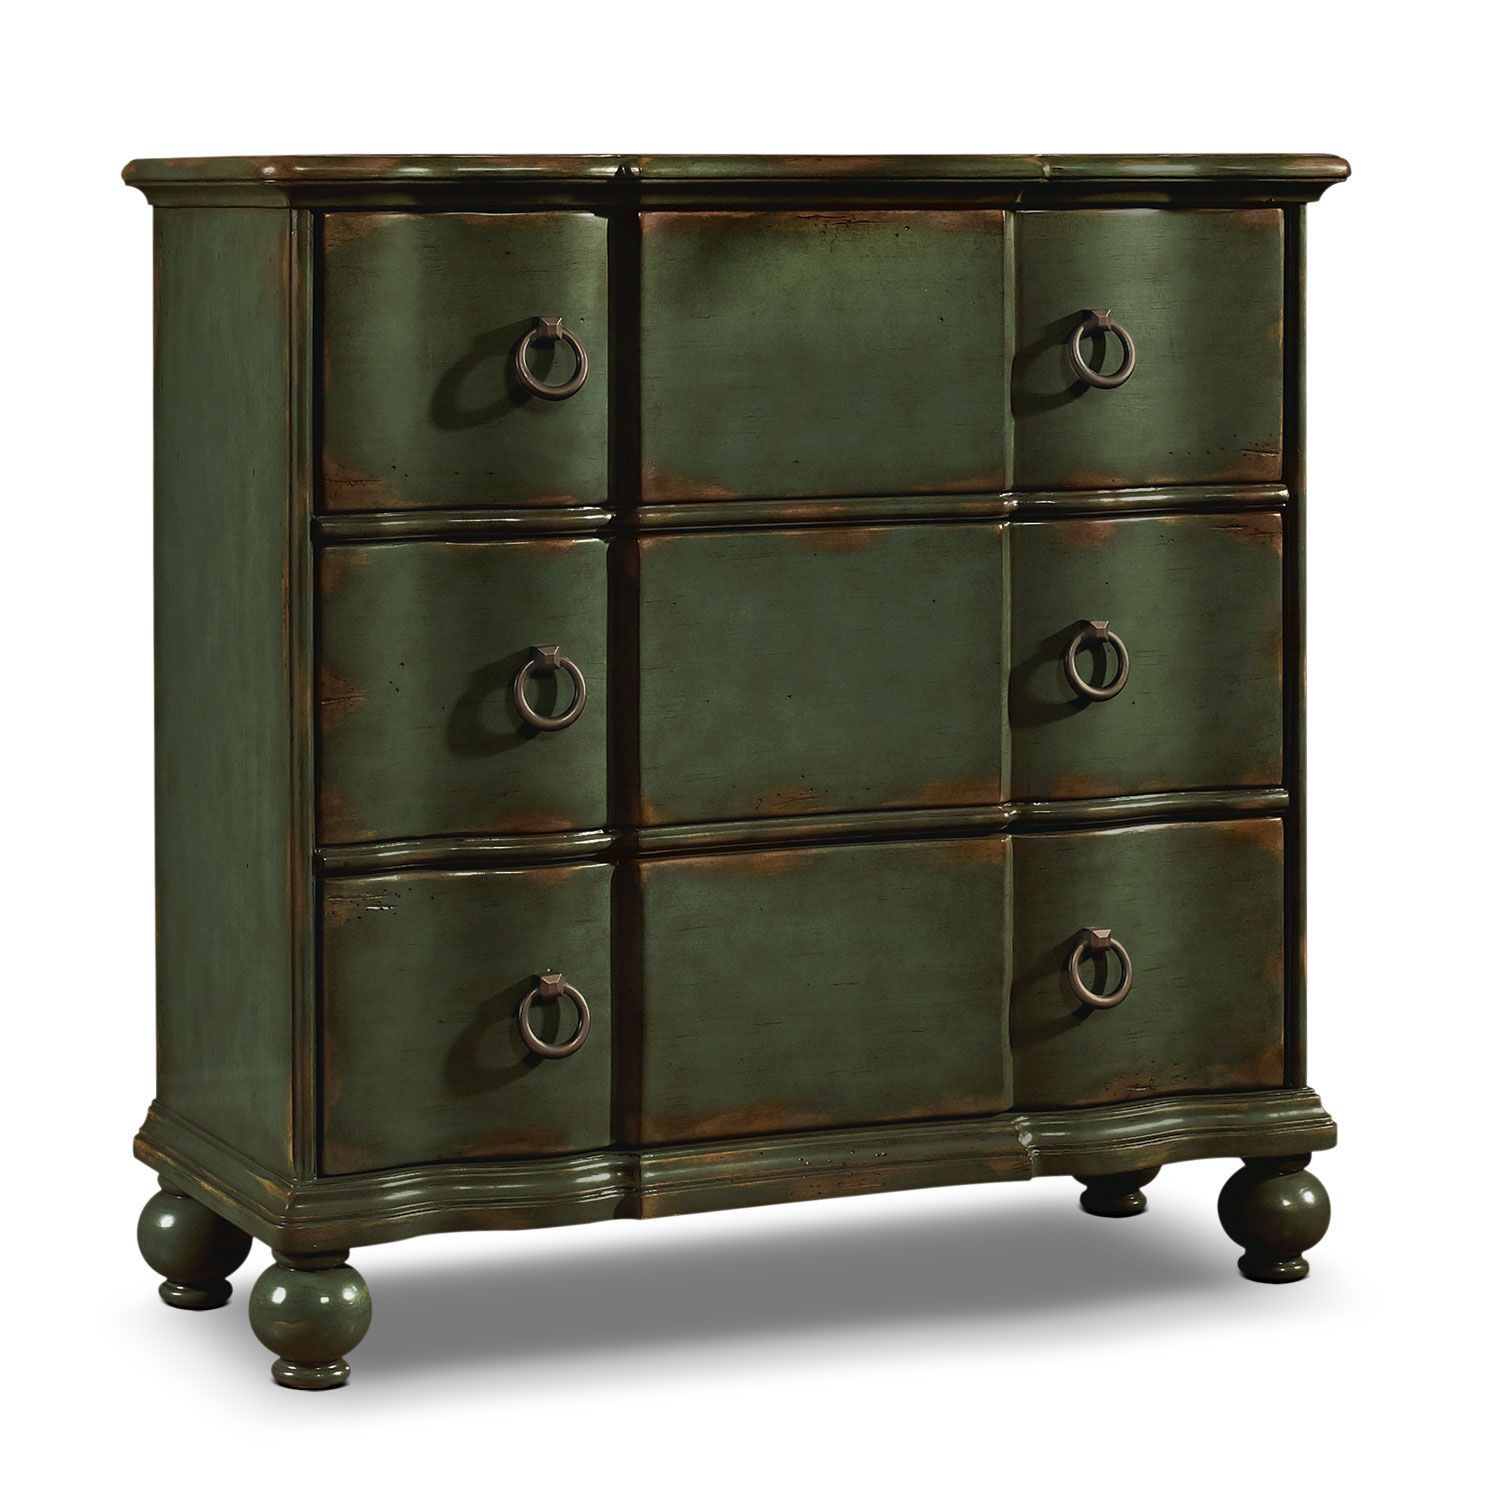 tuscano hall chest master bedroom distressed blue accent table the green finish antique looking subtly reveals blond layer beneath generate intrigue brown wicker end pottery barn